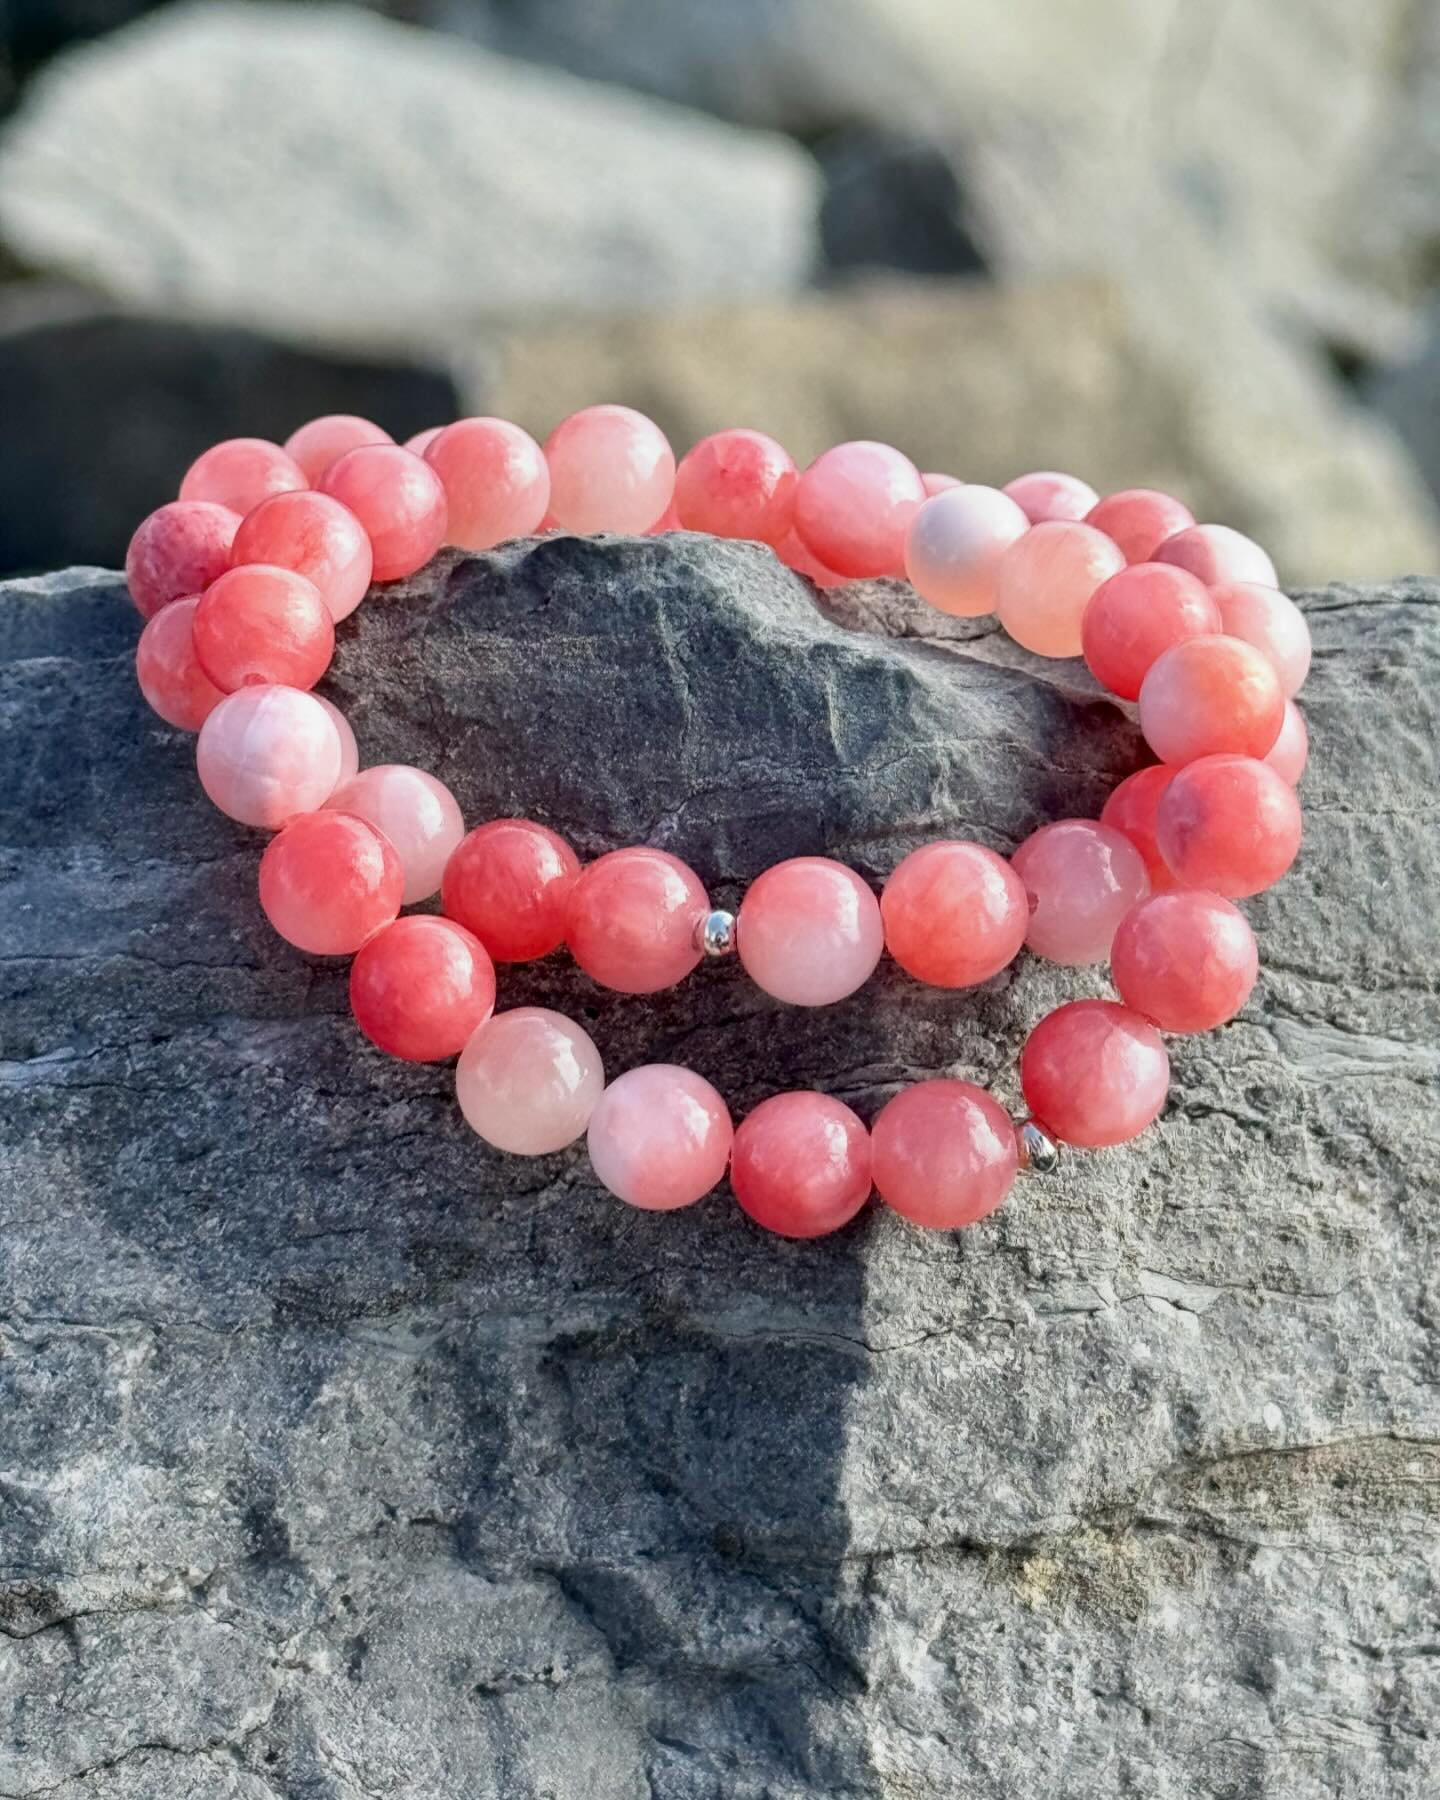 Perfect for each other 💞♾️🛍️www.simonaisabeljewelry.com

#simonaisabel_jewelry #handmade #jewelry #bracelets #trendy #trendingjewelry #trending #trendylook #style #summer #spring #fashion #shopping #shoppingonline #perfect #beautiful #perfectgifts 